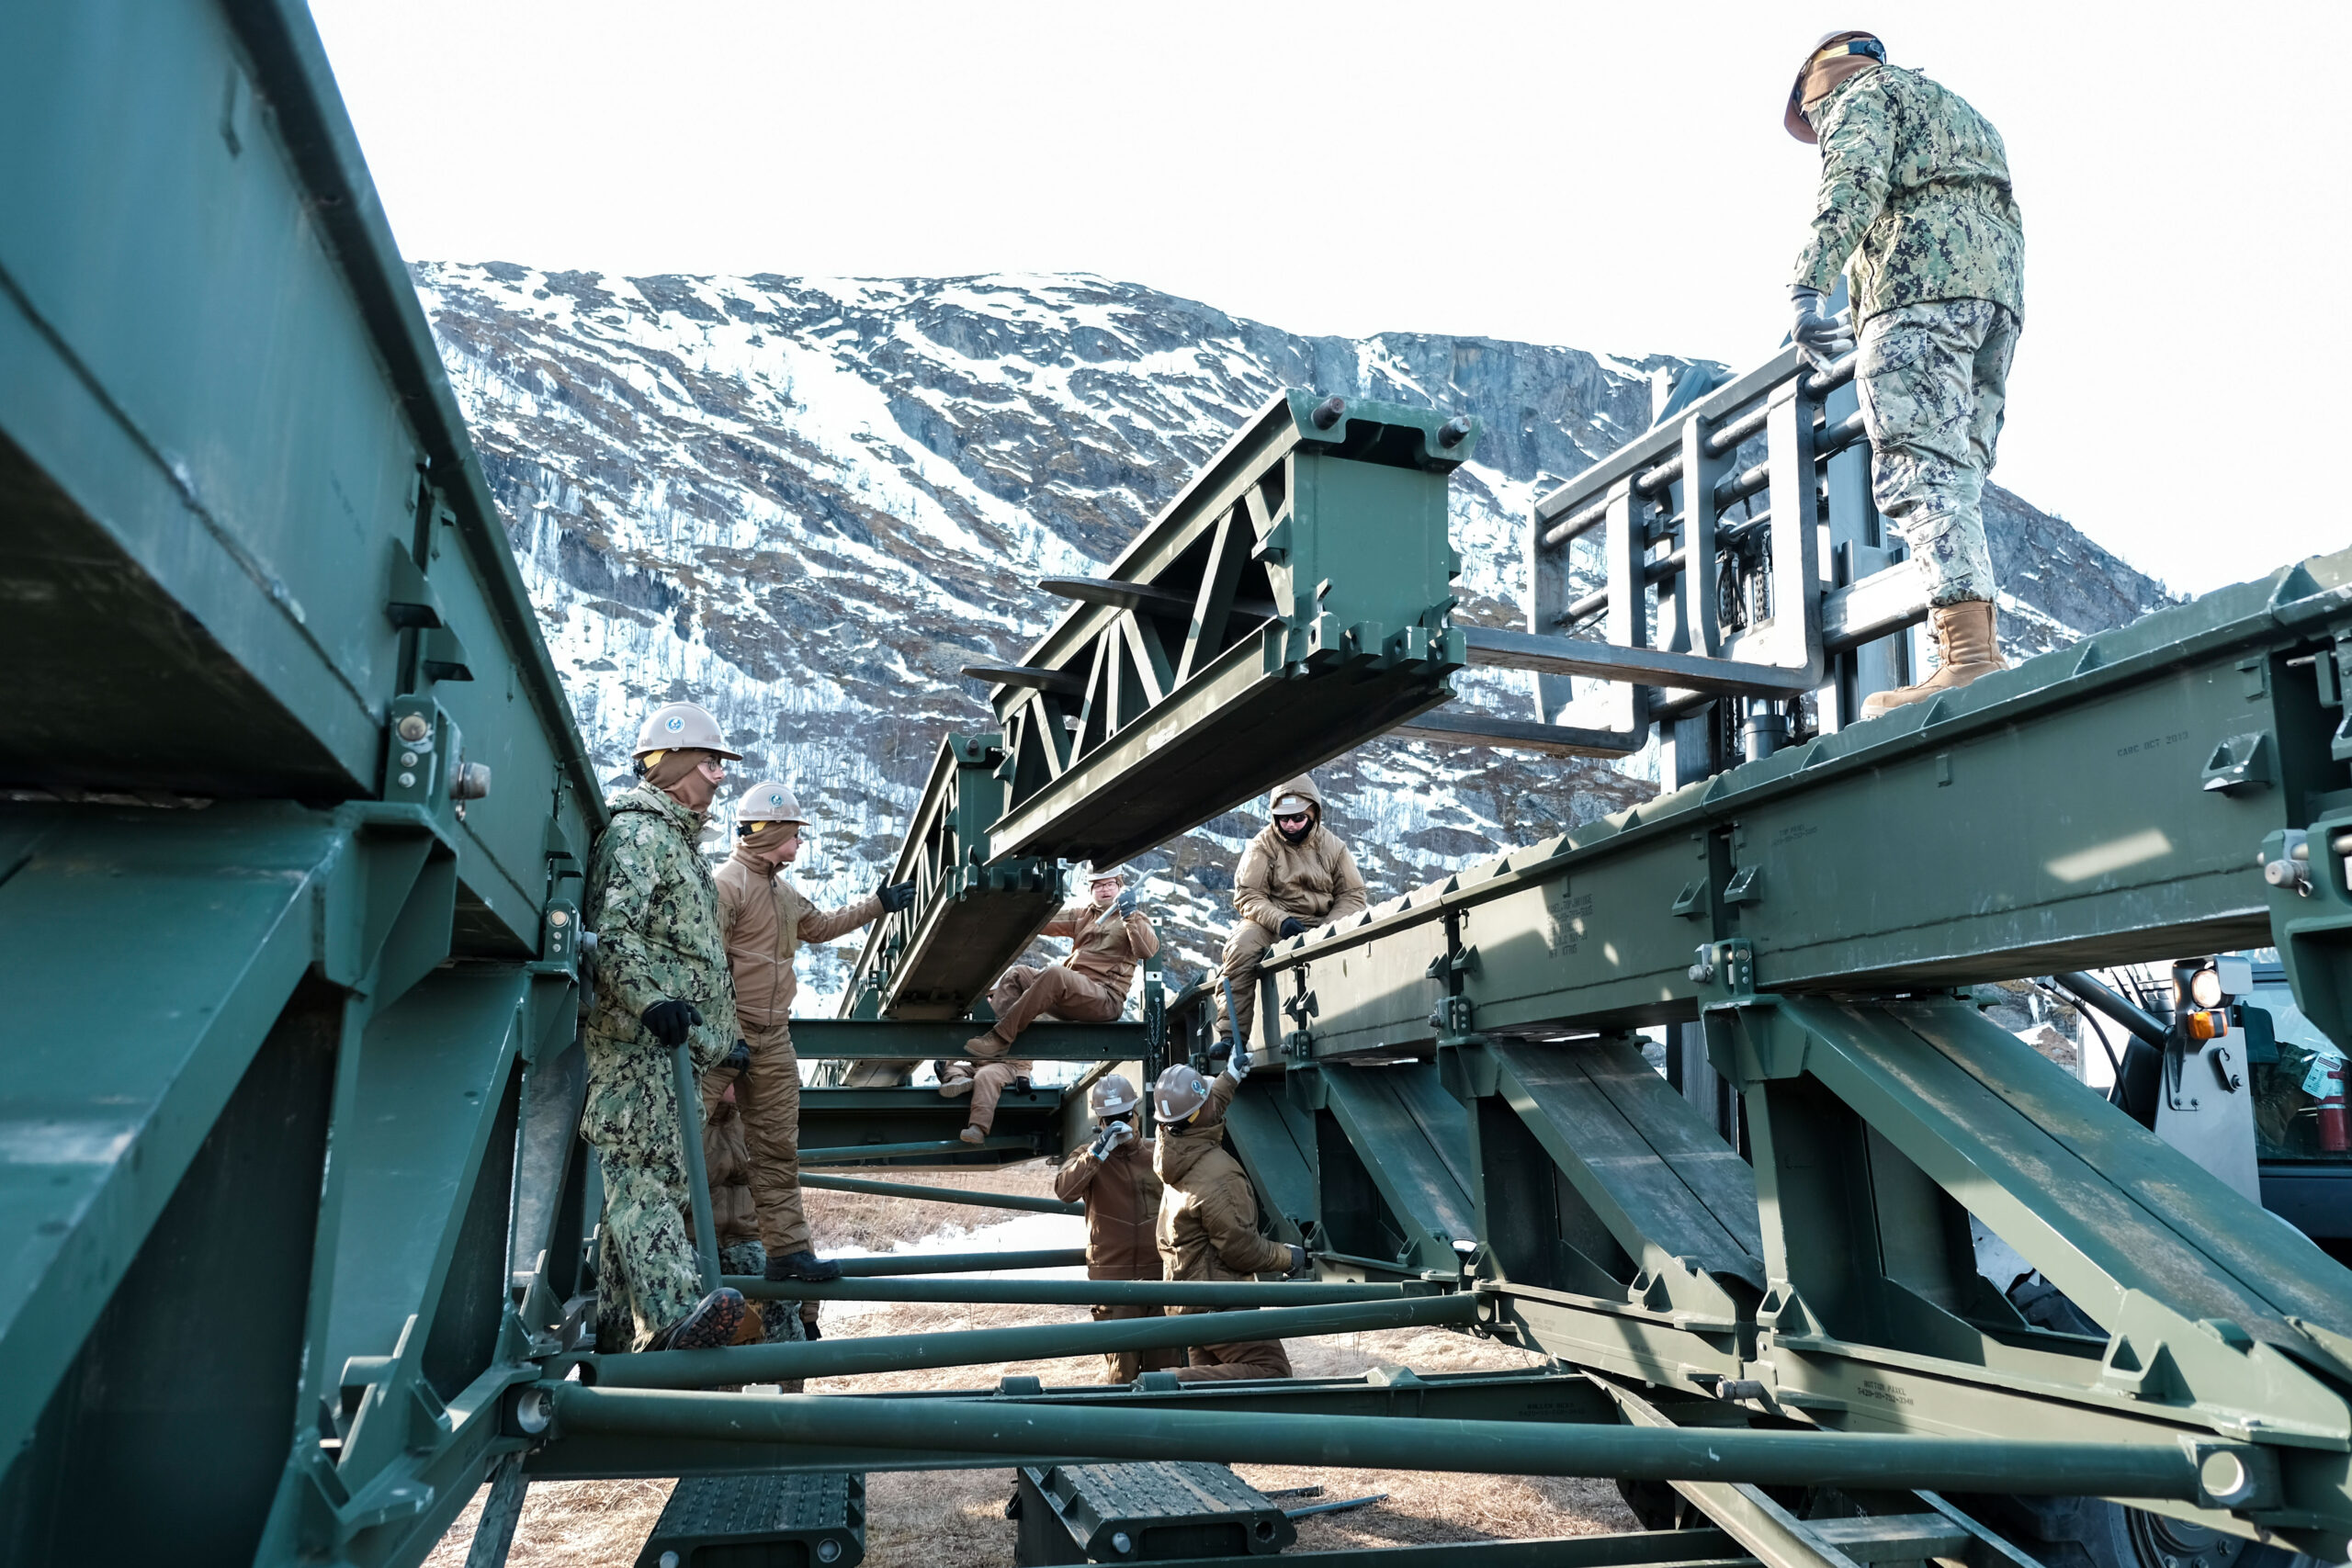 BJERKVIK, Norway (April 23, 2024) - U.S. Navy Sailors assigned to Naval Mobile Construction Battalion (NMCB) 11 assemble a medium girder bridge in support of Immediate Response 2024 in Bjerkvik, Nordland County, Norway, April 23, 2024. DEFENDER is the Dynamic Employment of Forces to Europe for NATO Deterrence and Enhanced Readiness, and is a U.S. European Command scheduled, U.S. Army Europe and Africa conducted exercise that consists of Saber Strike, Immediate Response, and Swift Response. DEFENDER 24 is linked to NATO’s Steadfast Defender exercise, and DoD’s Large Scale Global Exercise, taking place from 28 March to 31 May. DEFENDER 24 is the largest U.S. Army exercise in Europe and includes more than 17,000 U.S. and 23,000 multinational service members from more than 20 Allied and partner nations, including Croatia, Czechia, Denmark, Estonia, Finland, France, Germany, Georgia, Hungary, Italy, Latvia, Lithuania, Moldova, Netherlands, North Macedonia, Norway, Poland, Romania, Slovakia, Spain, Sweden, and the United Kingdom. (U.S. Navy photo by Builder Constructionman Laqdrick Bouldin)